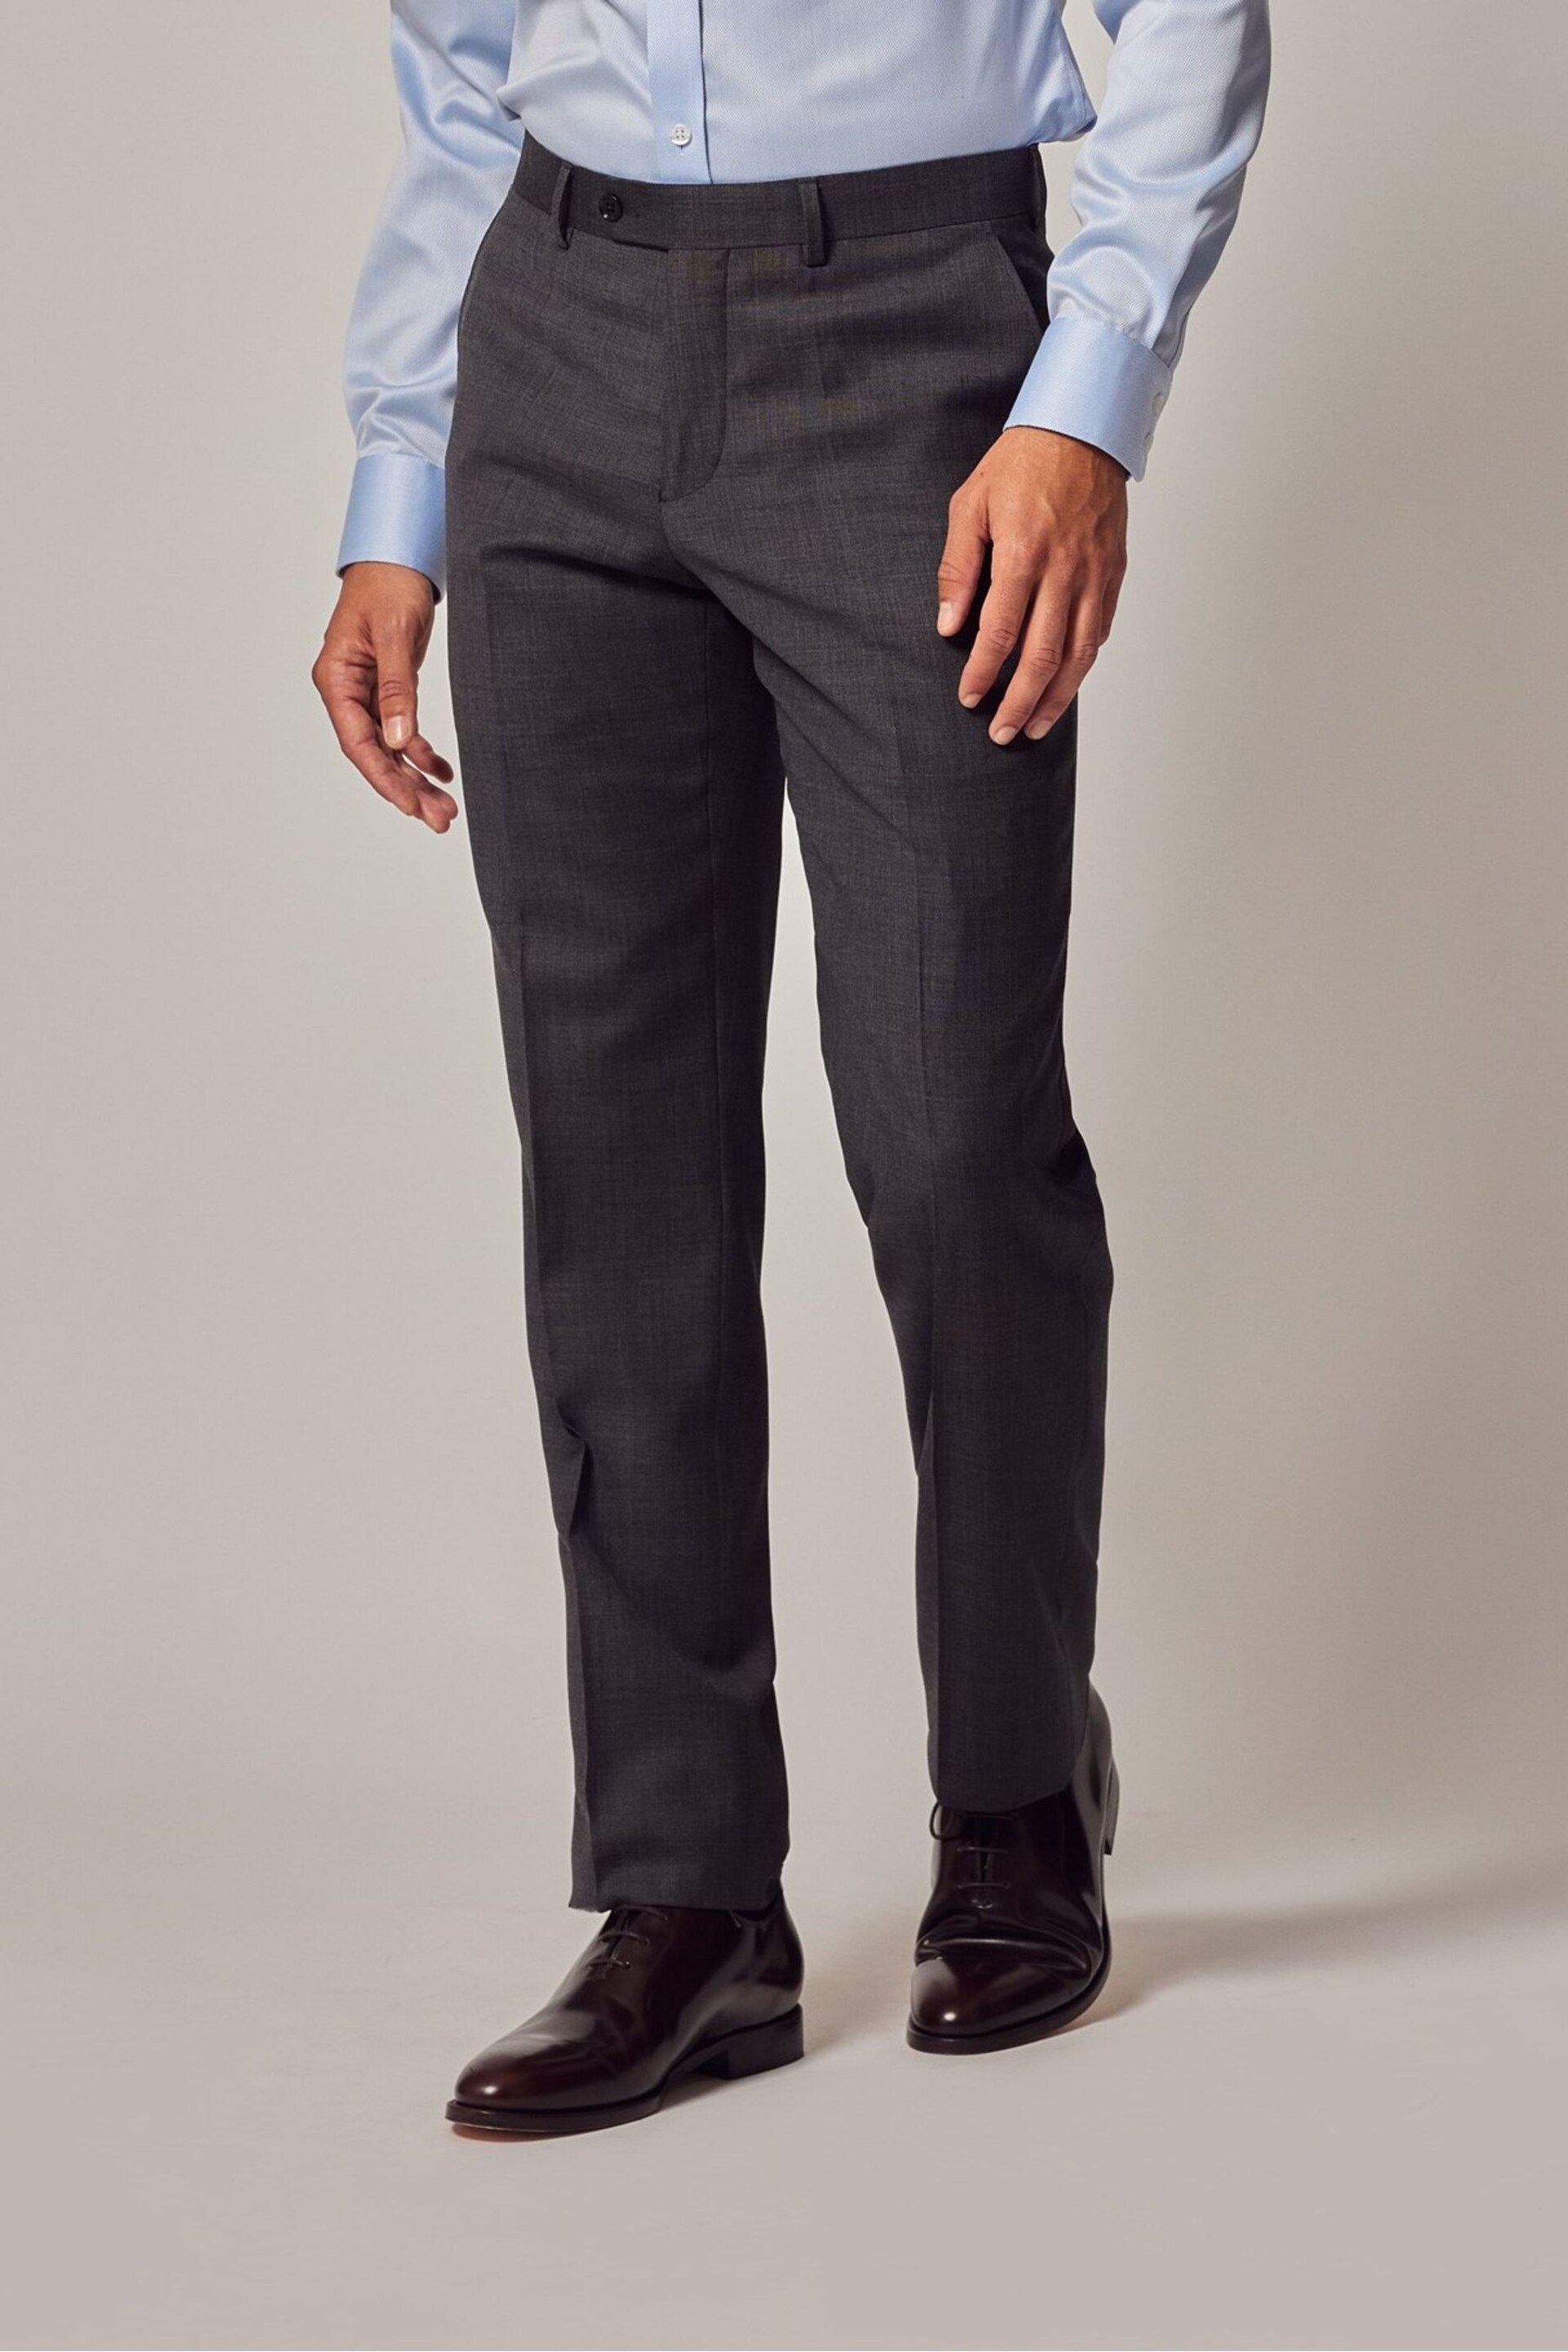 Hawes & Curtis Slim Grey Twill Suit Trousers - Image 1 of 3